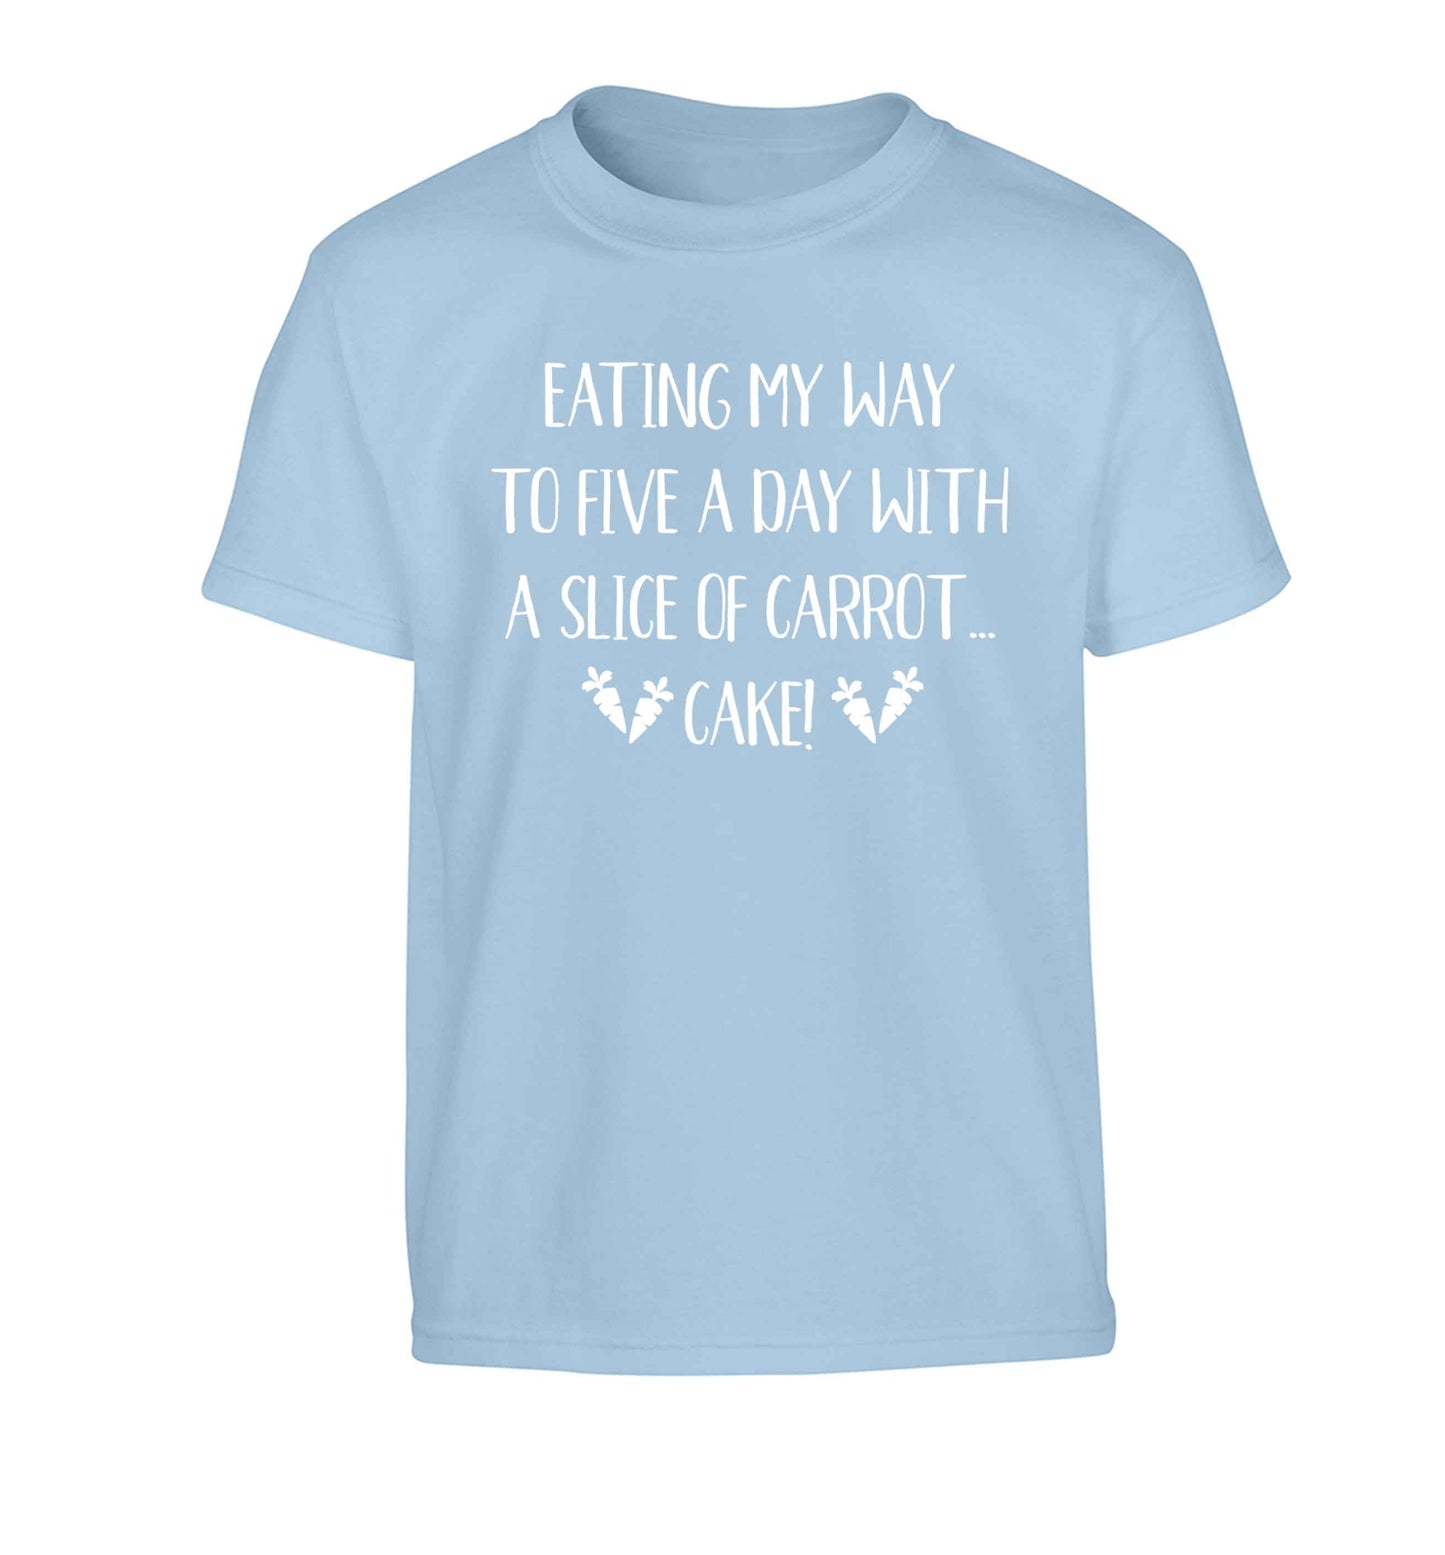 Eating my way to five a day with a slice of carrot cake day Children's light blue Tshirt 12-13 Years